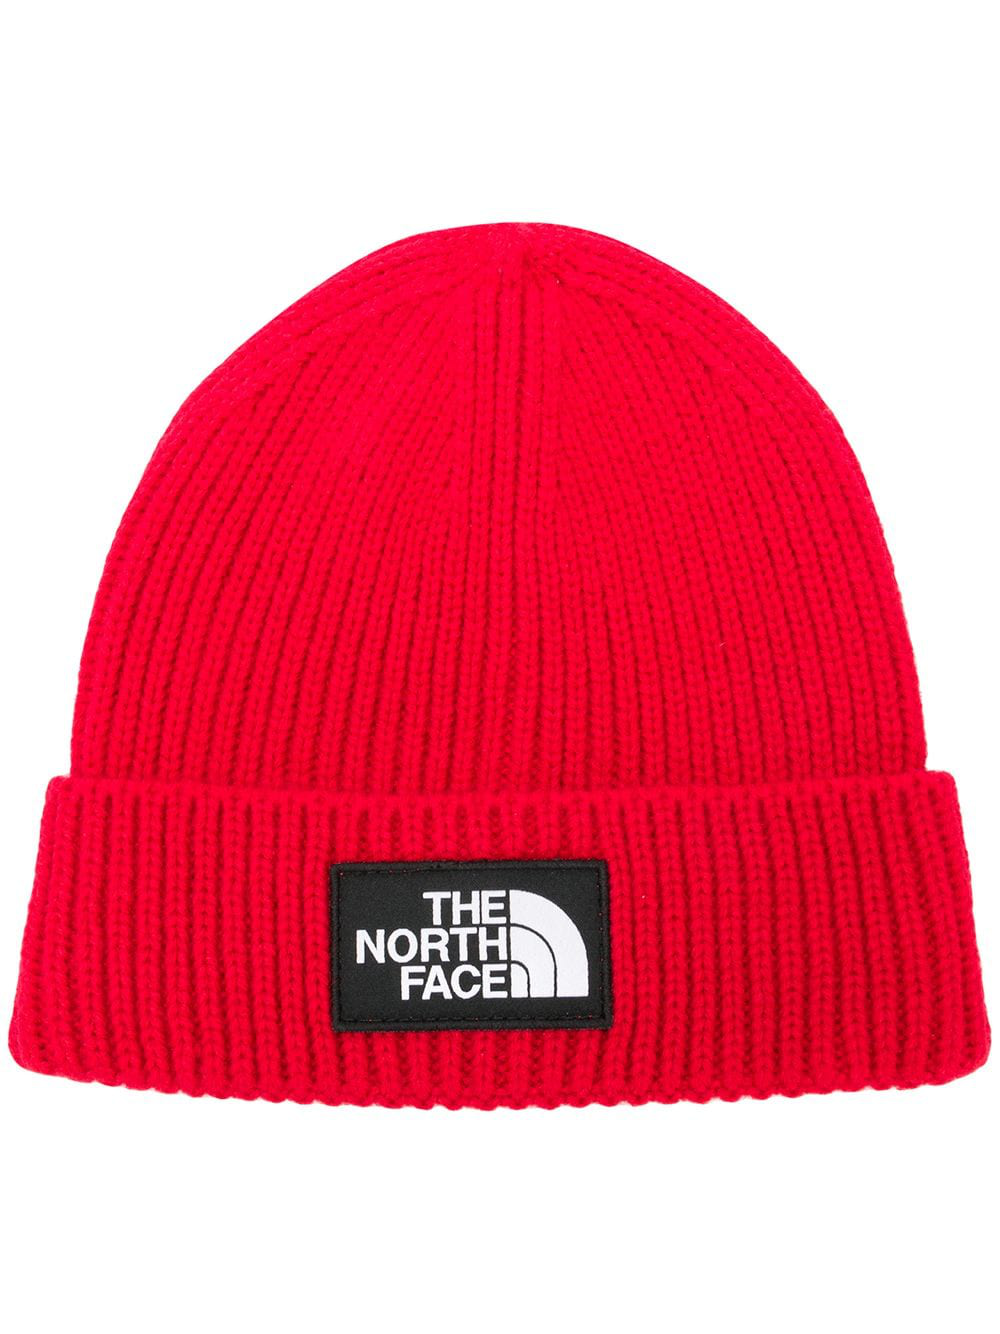 The North Face Logo Patch Beanie In Red | ModeSens